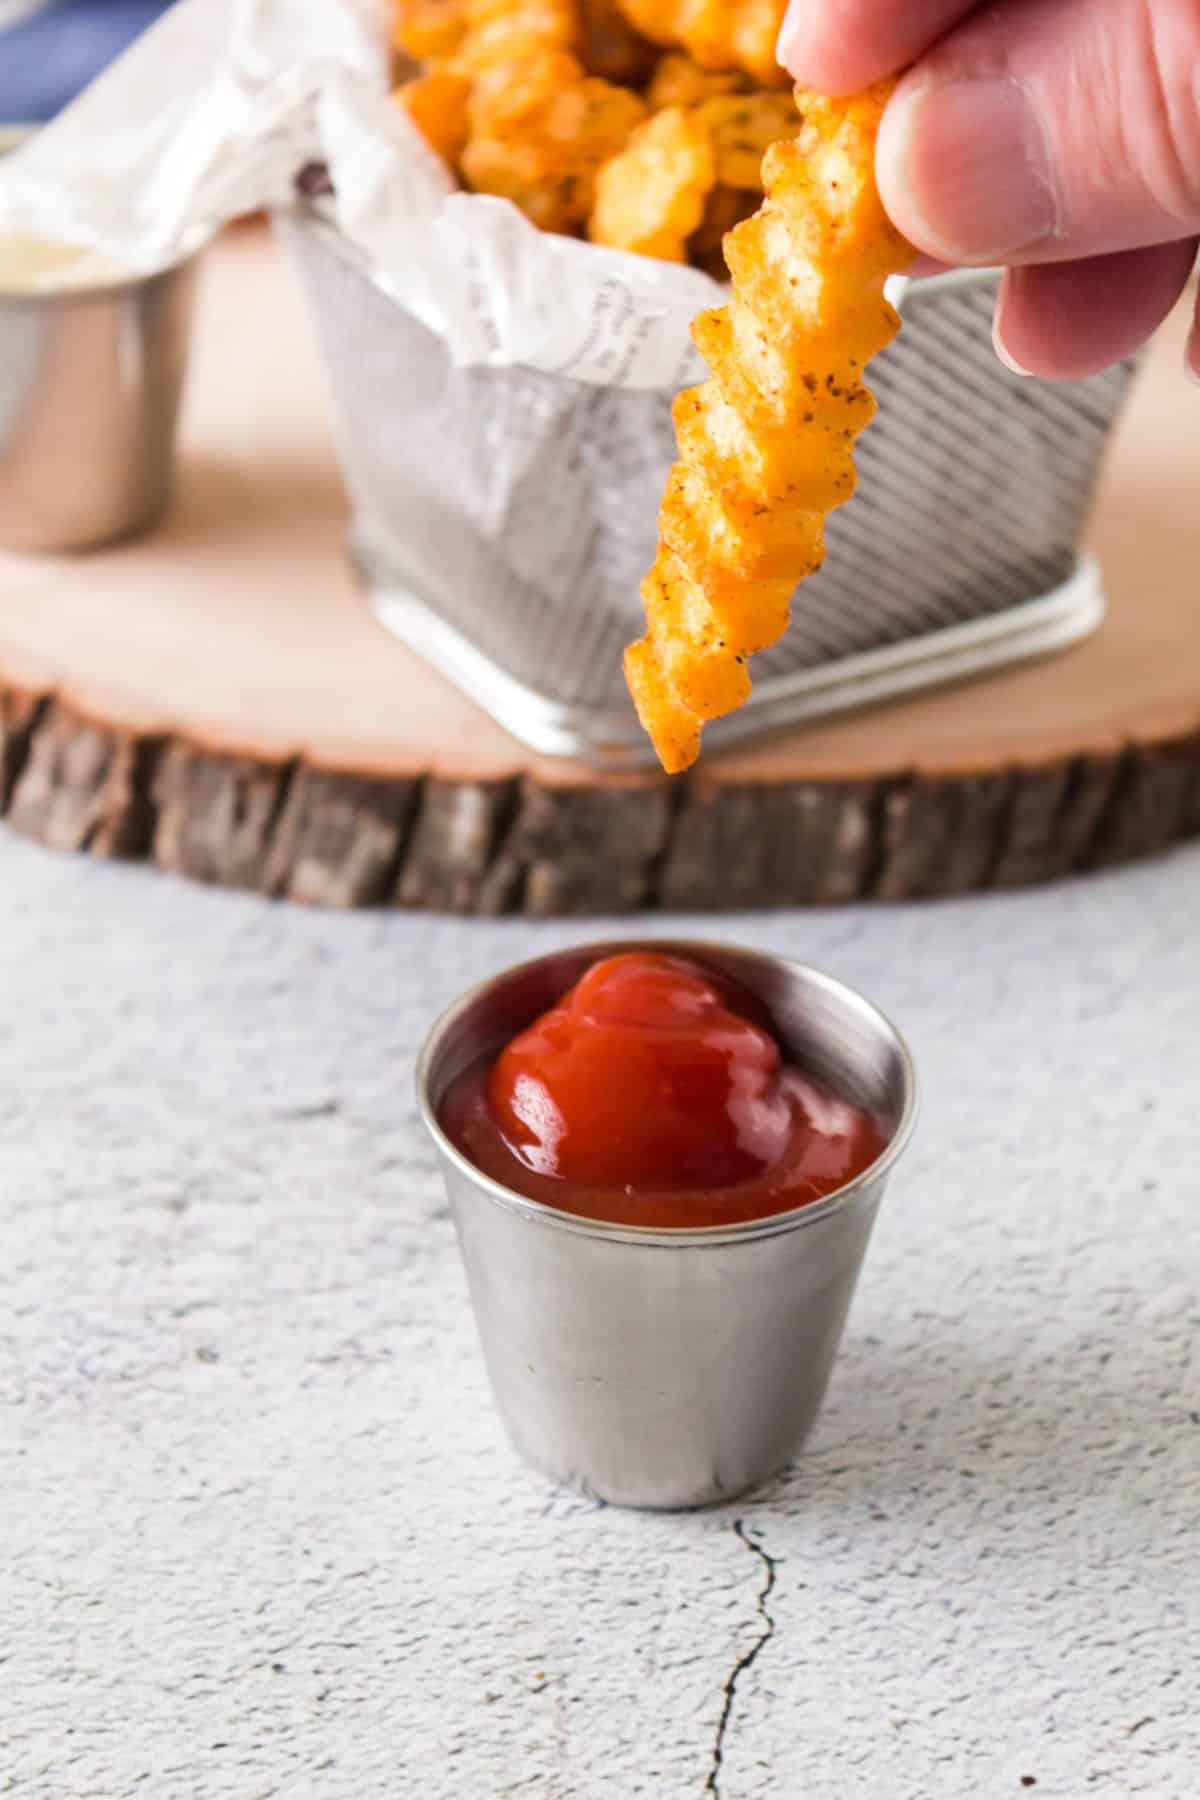 https://forktospoon.com/wp-content/uploads/2022/05/Air-Fryer-Cajun-Spice-French-Fries-14-scaled.jpg